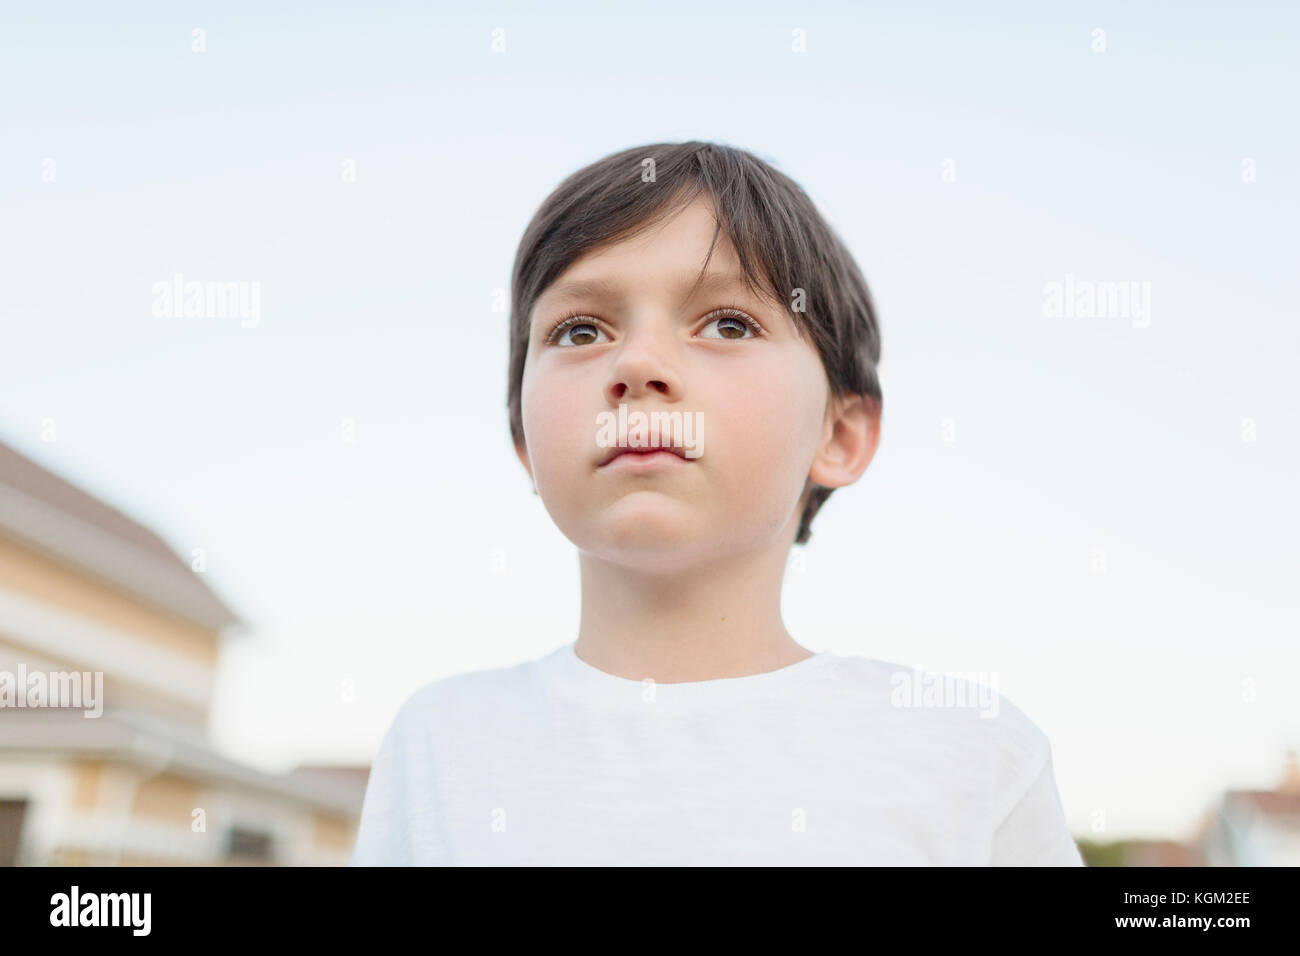 Close-up of boy looking away while standing against clear sky Banque D'Images